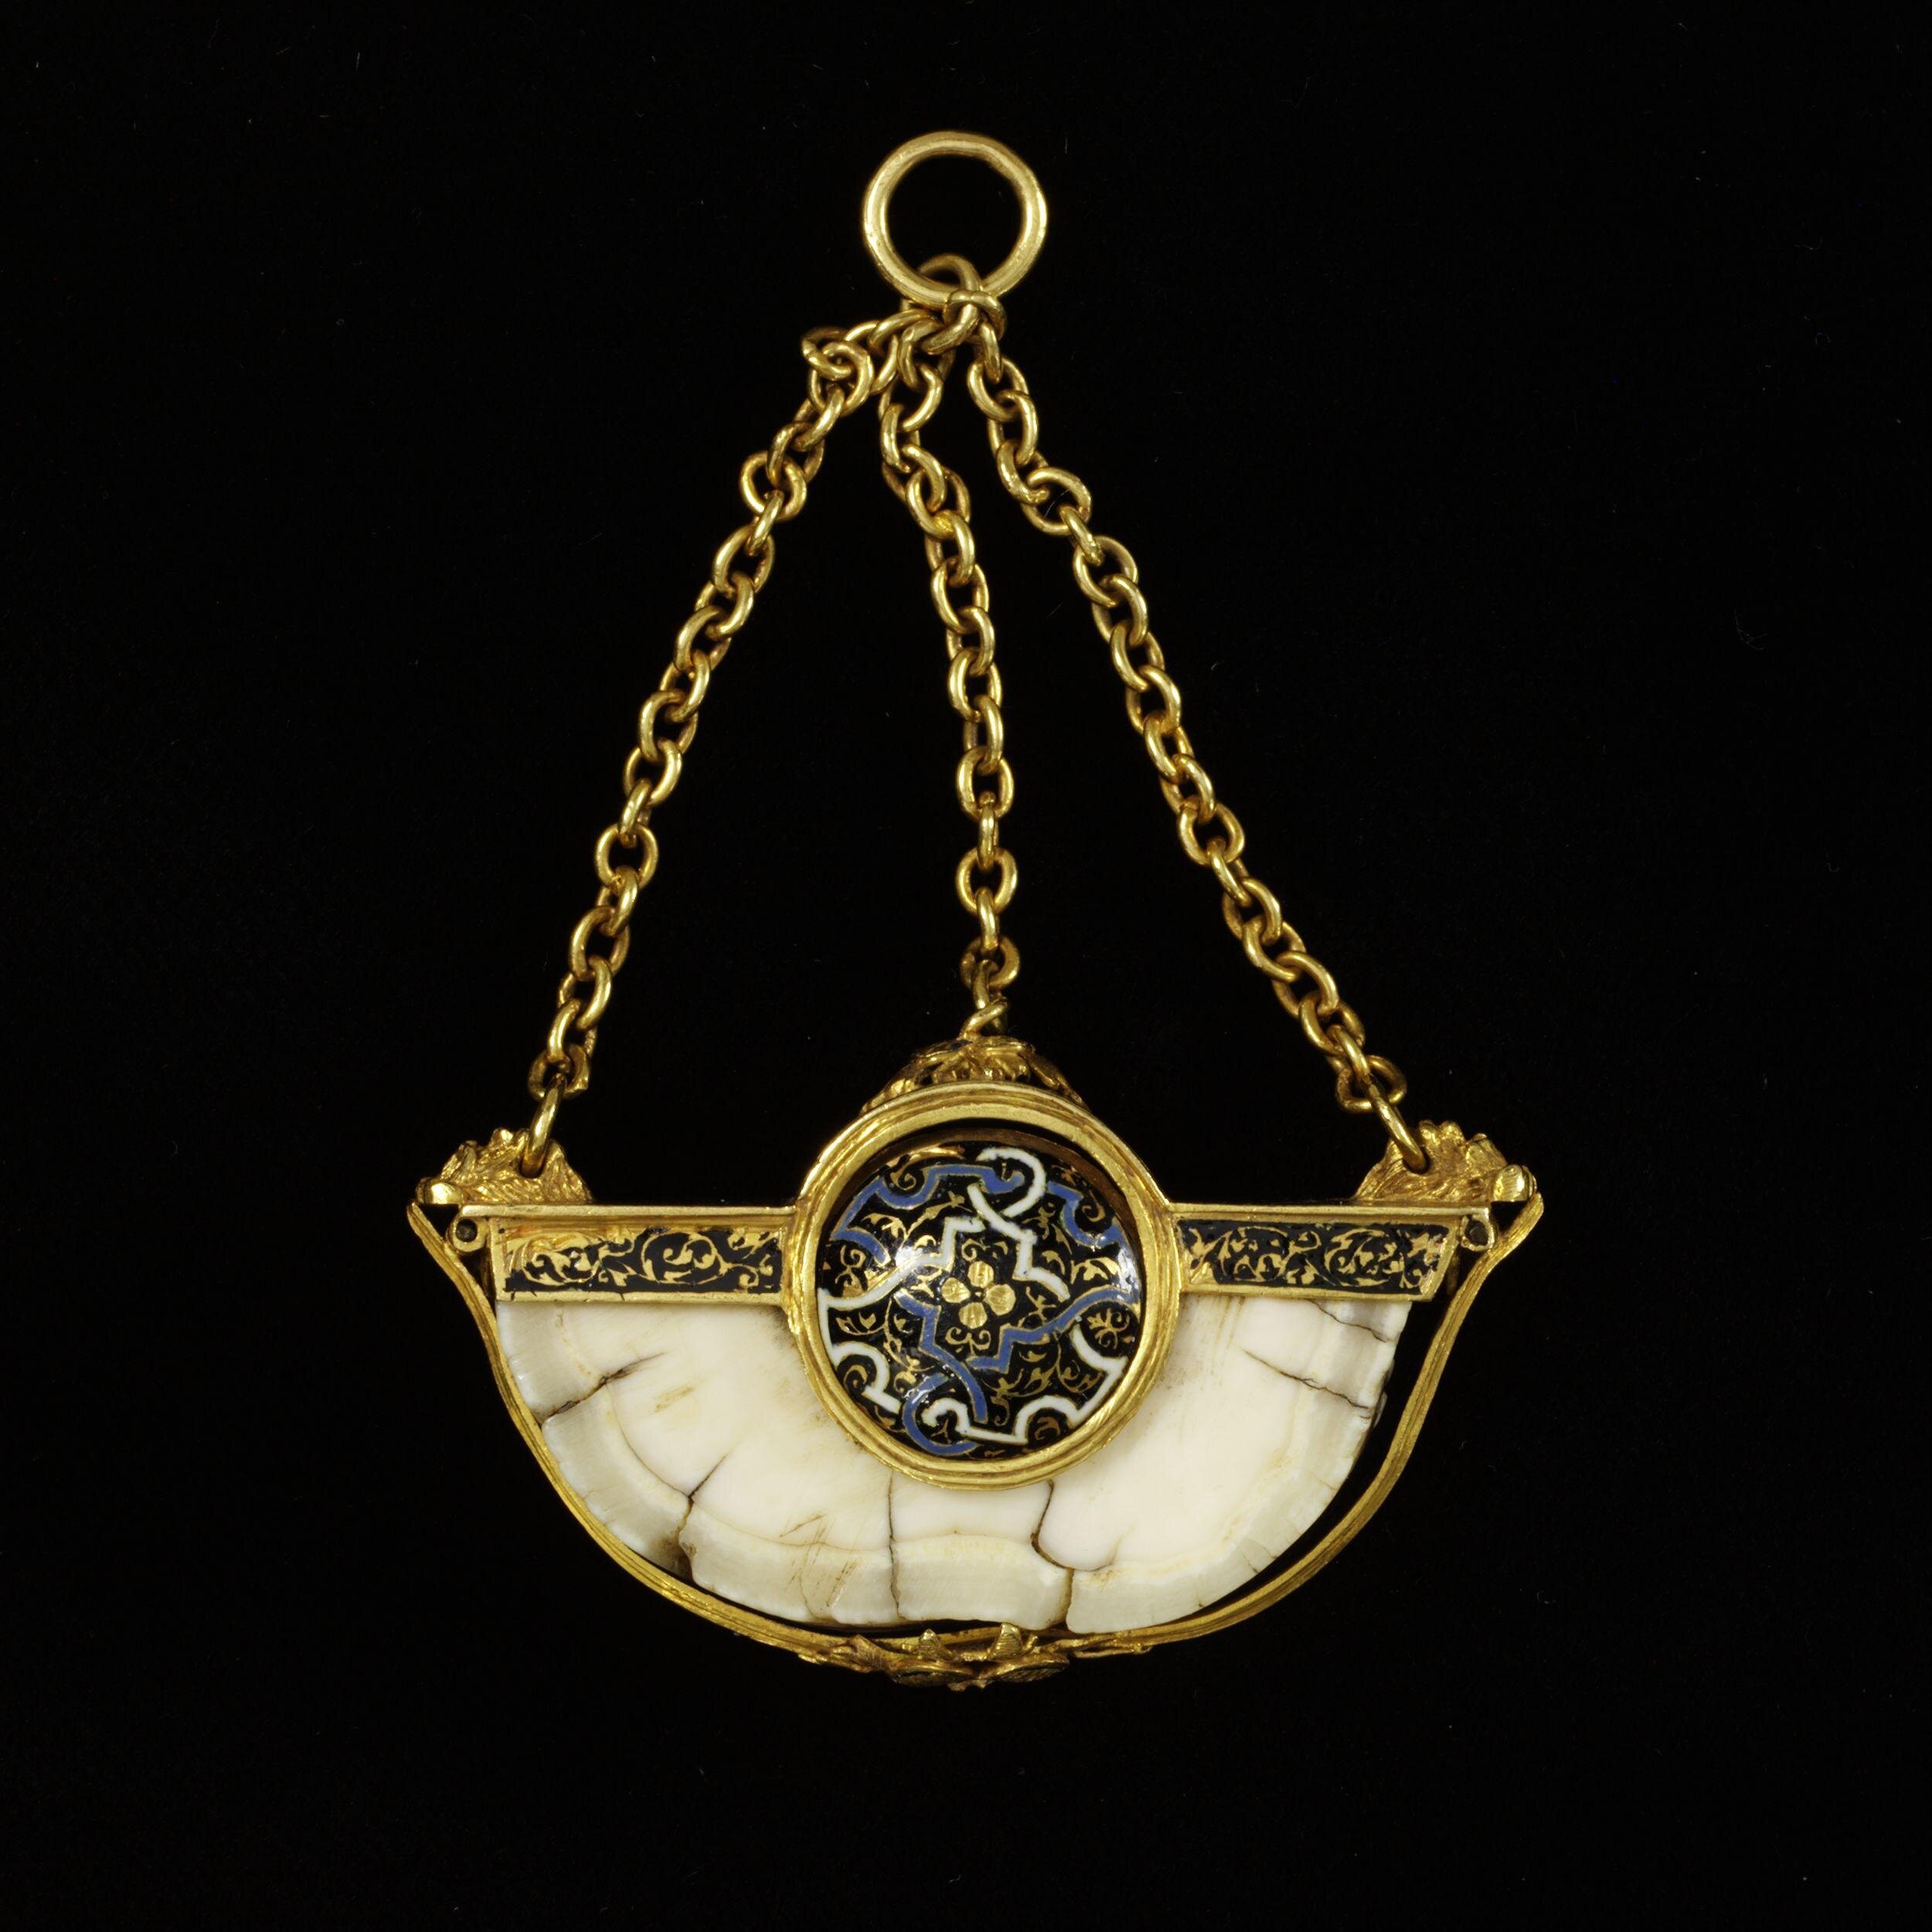 Pendant, 'The Danny Jewel', enamelled gold and a section of Narwhal's tusk, England, ca.1550. © Victoria and Albert Museum, London